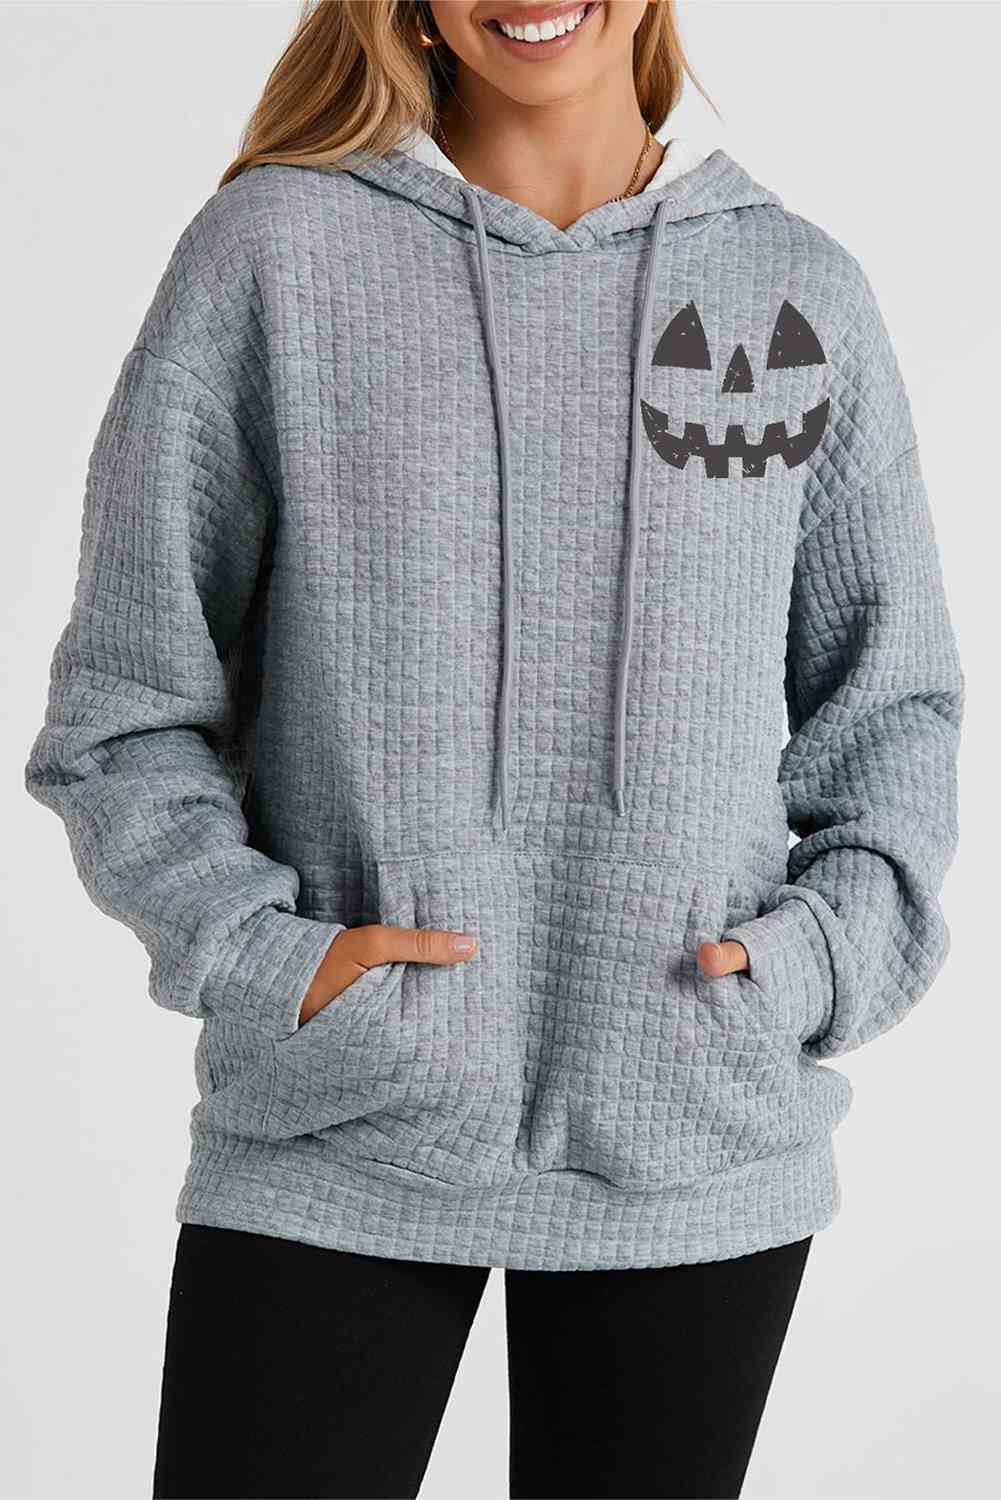 Pumpkin Face Graphic Drawstring Hoodie with Pocket BLUE ZONE PLANET